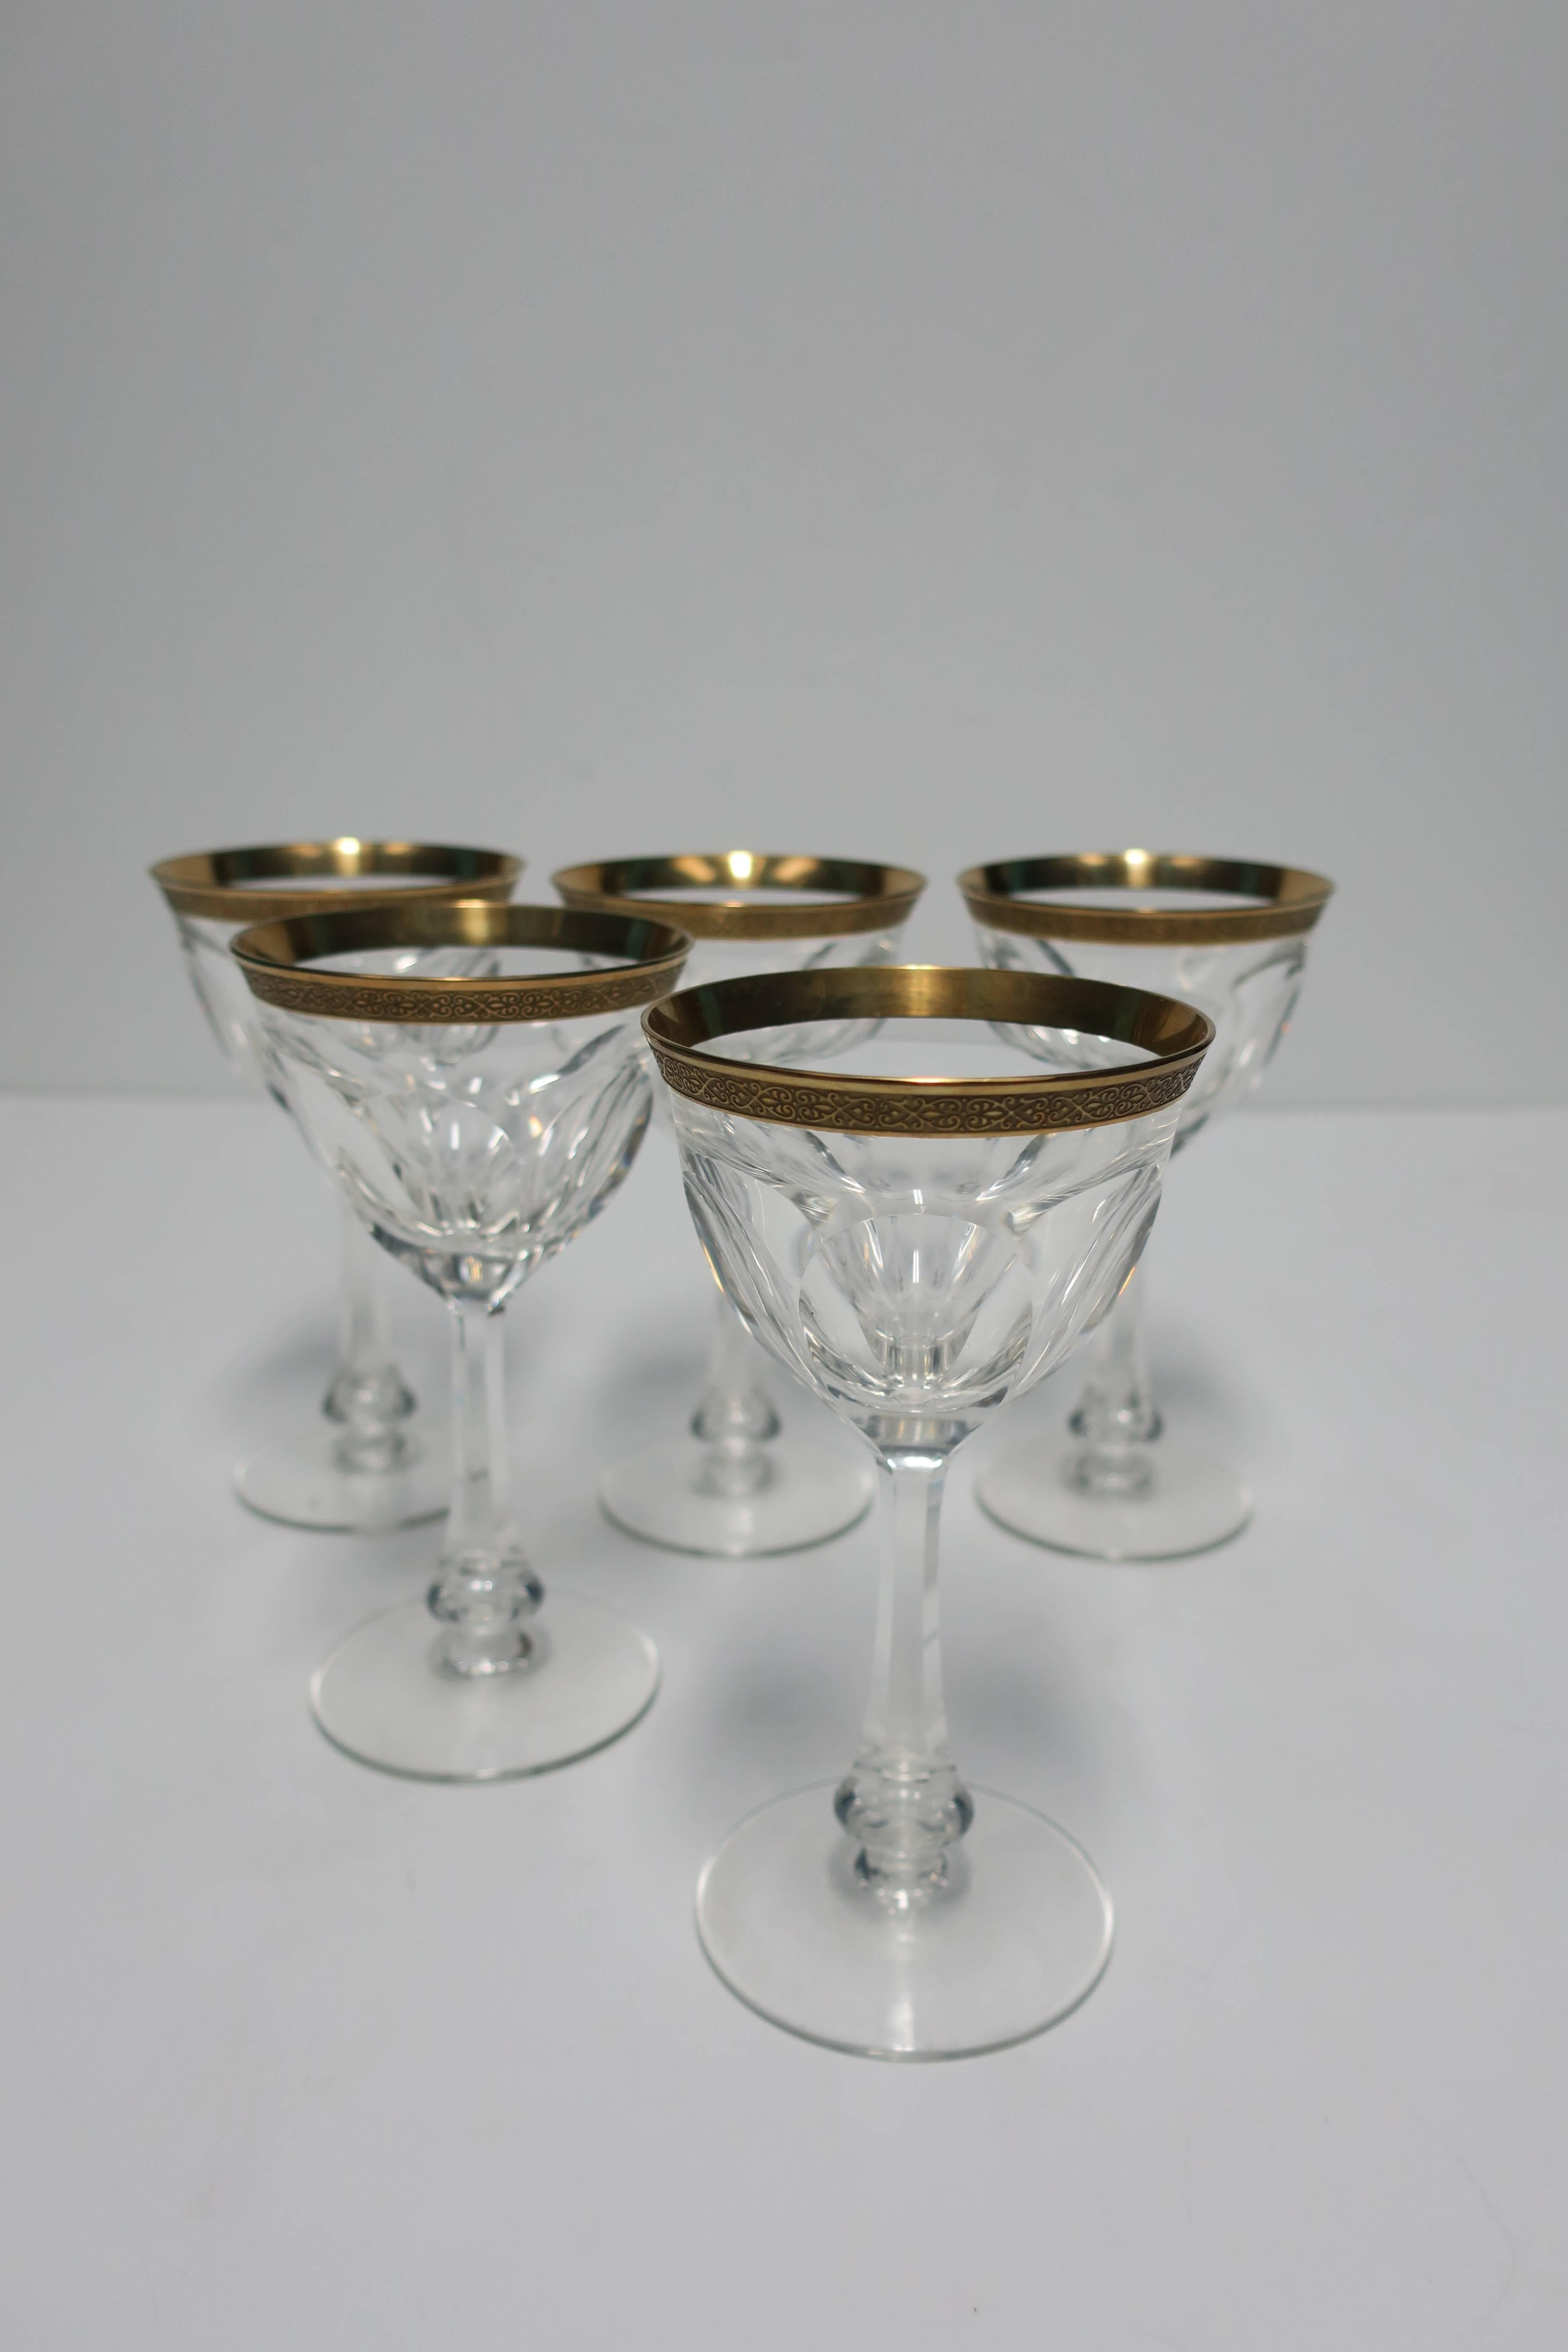 Gold Gilded Crystal Glasses in the Style of Baccarat 1